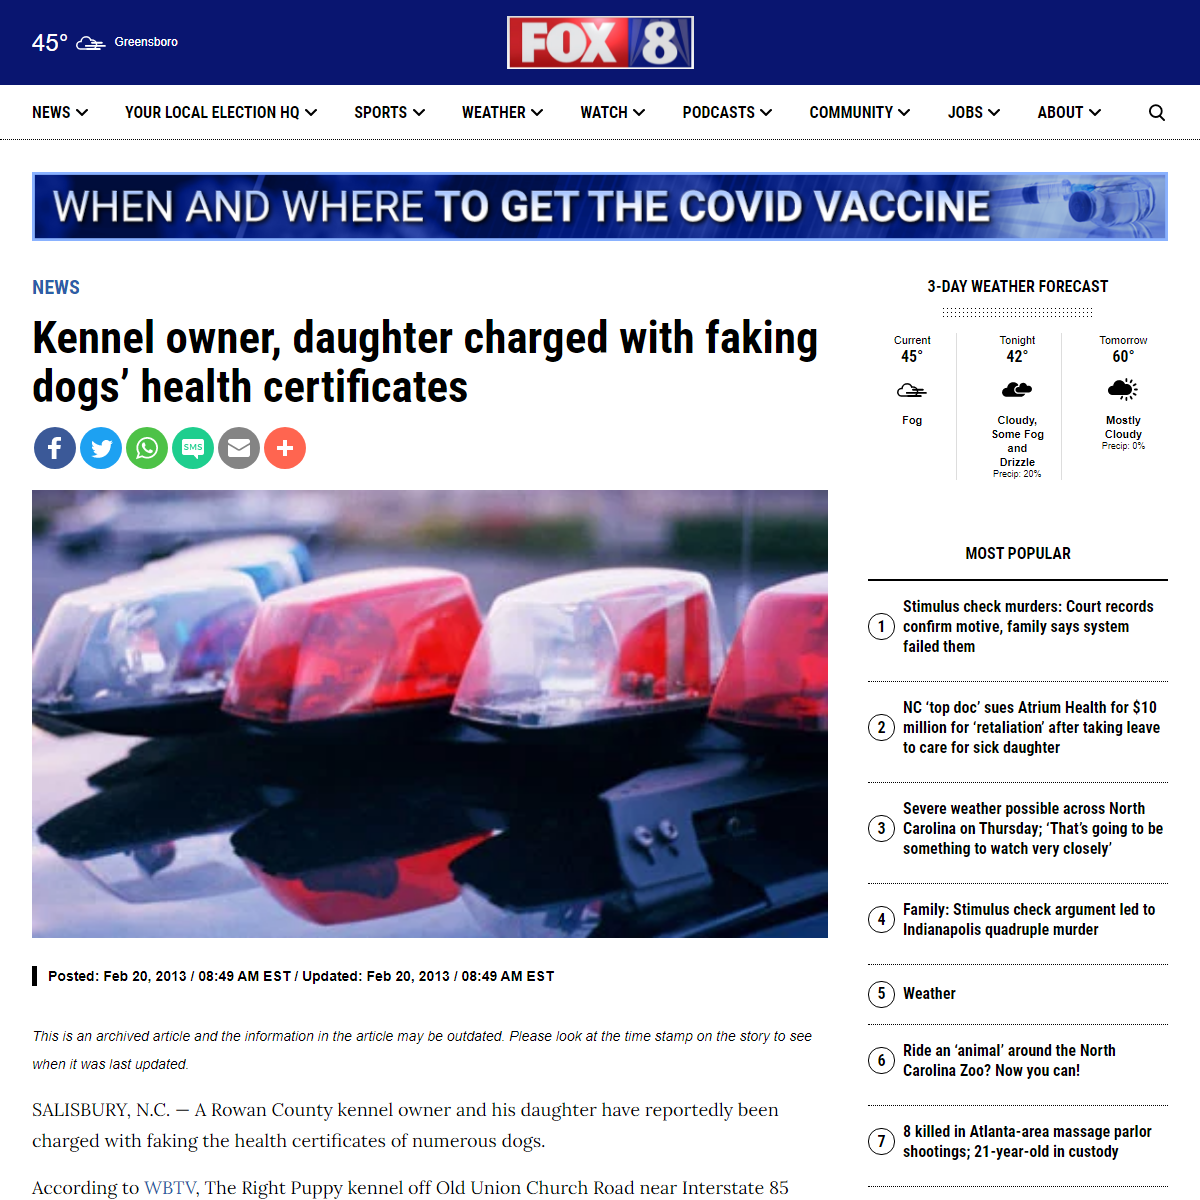 A complete backup of https://myfox8.com/news/kennel-owner-daughter-charged-with-faking-dogs-health-certificates/